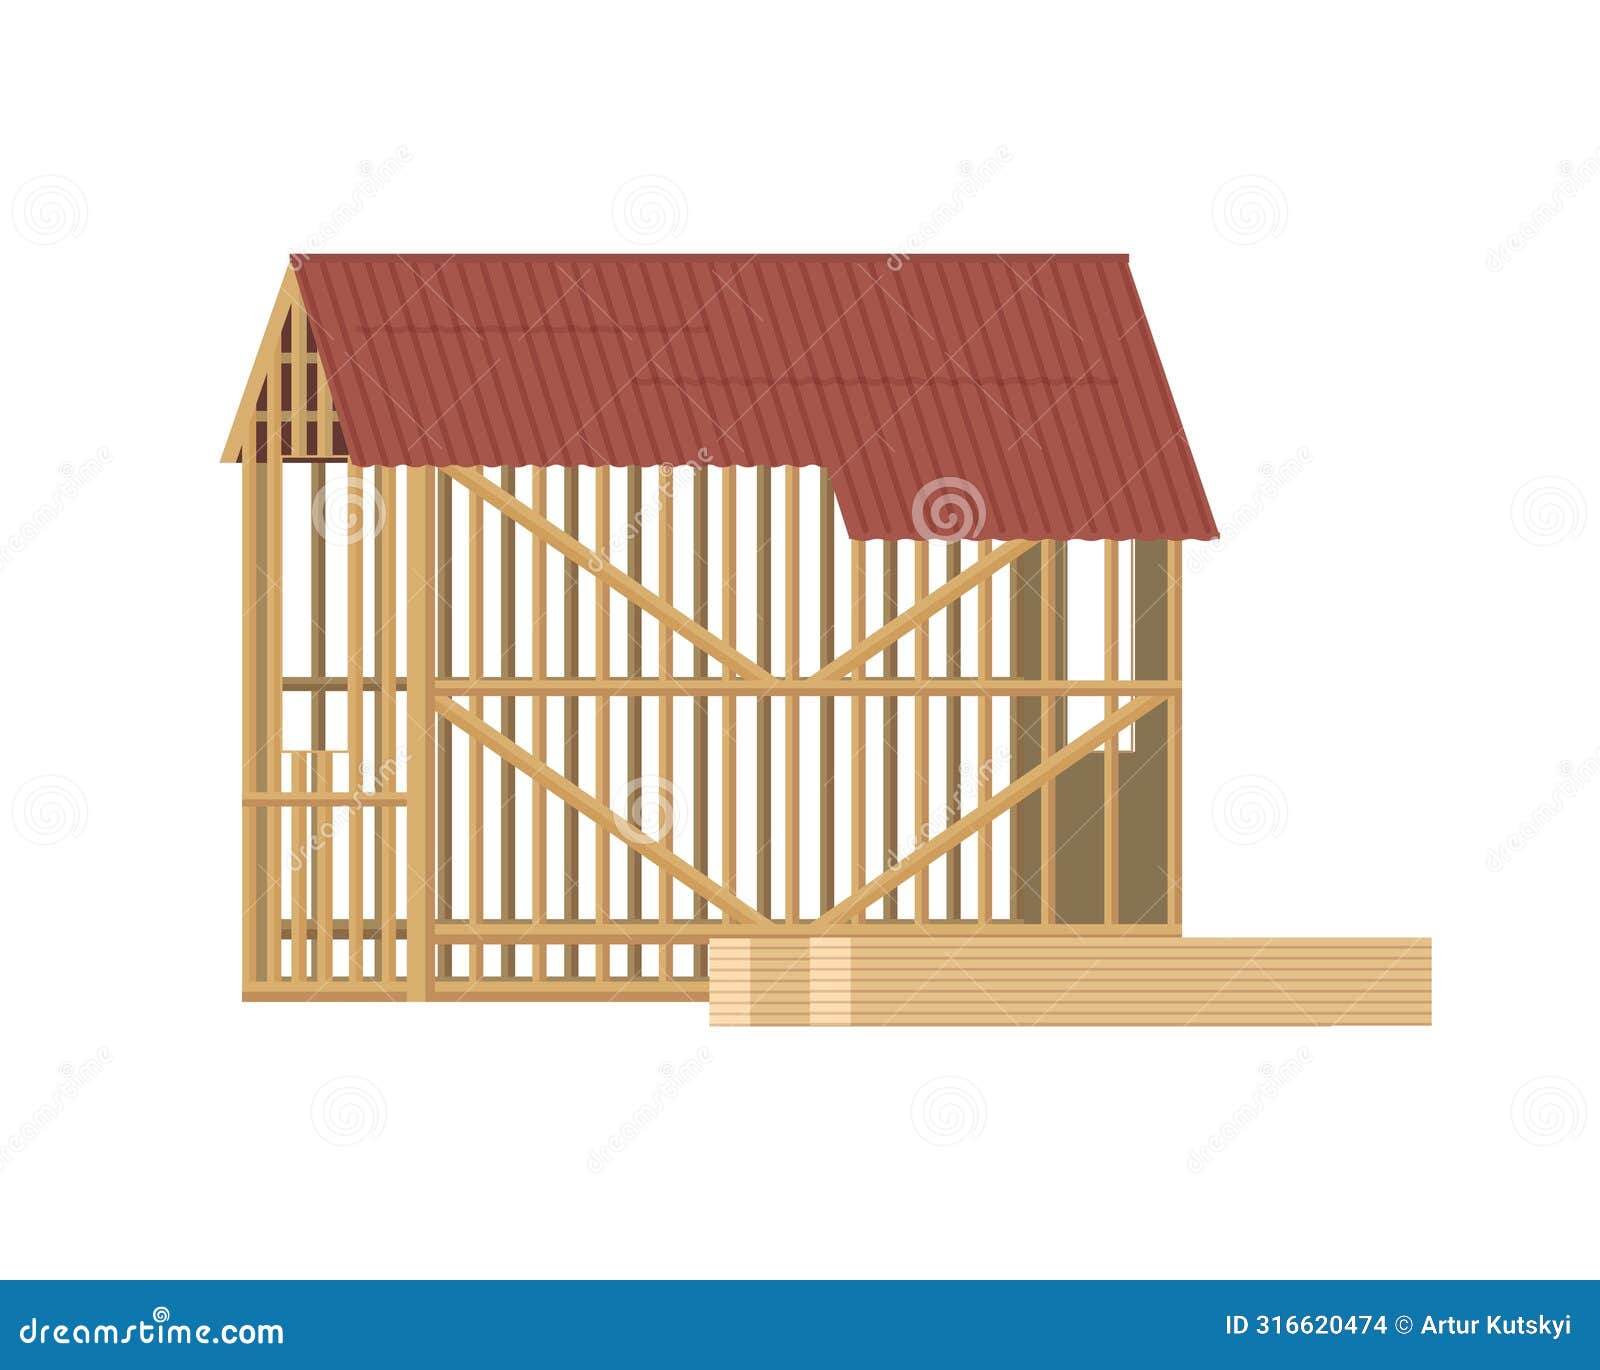 unfinished building with modern wooden construction frames